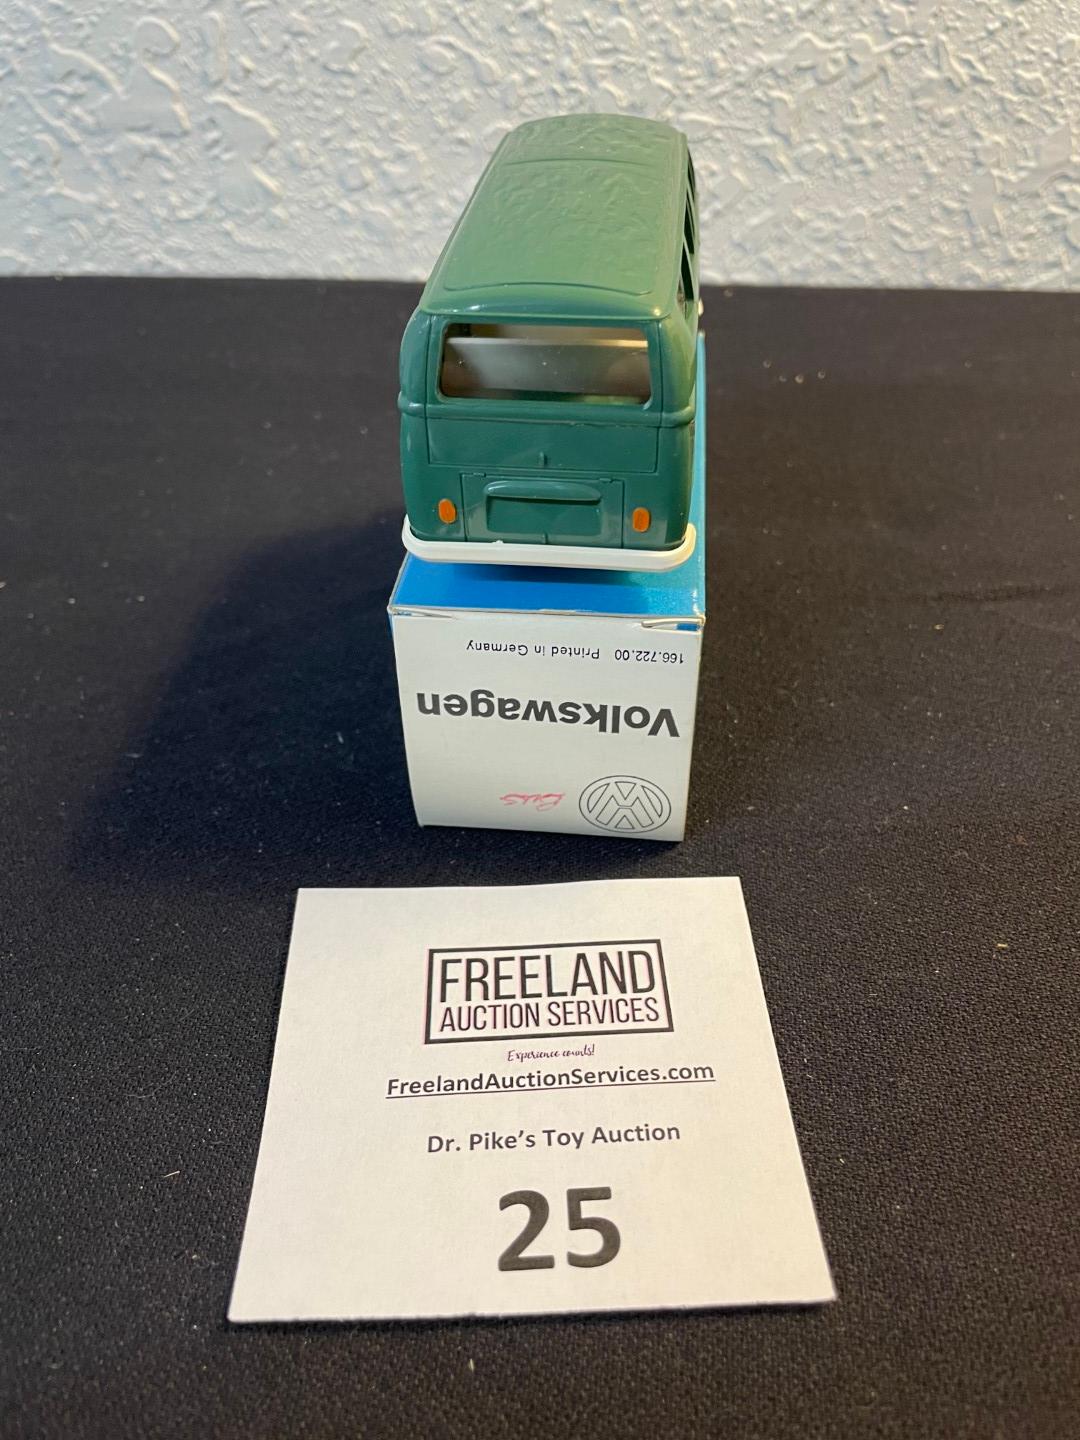 extremely rare Volkswagen promo GREEN BUS Cursor-Modell Made in Germany